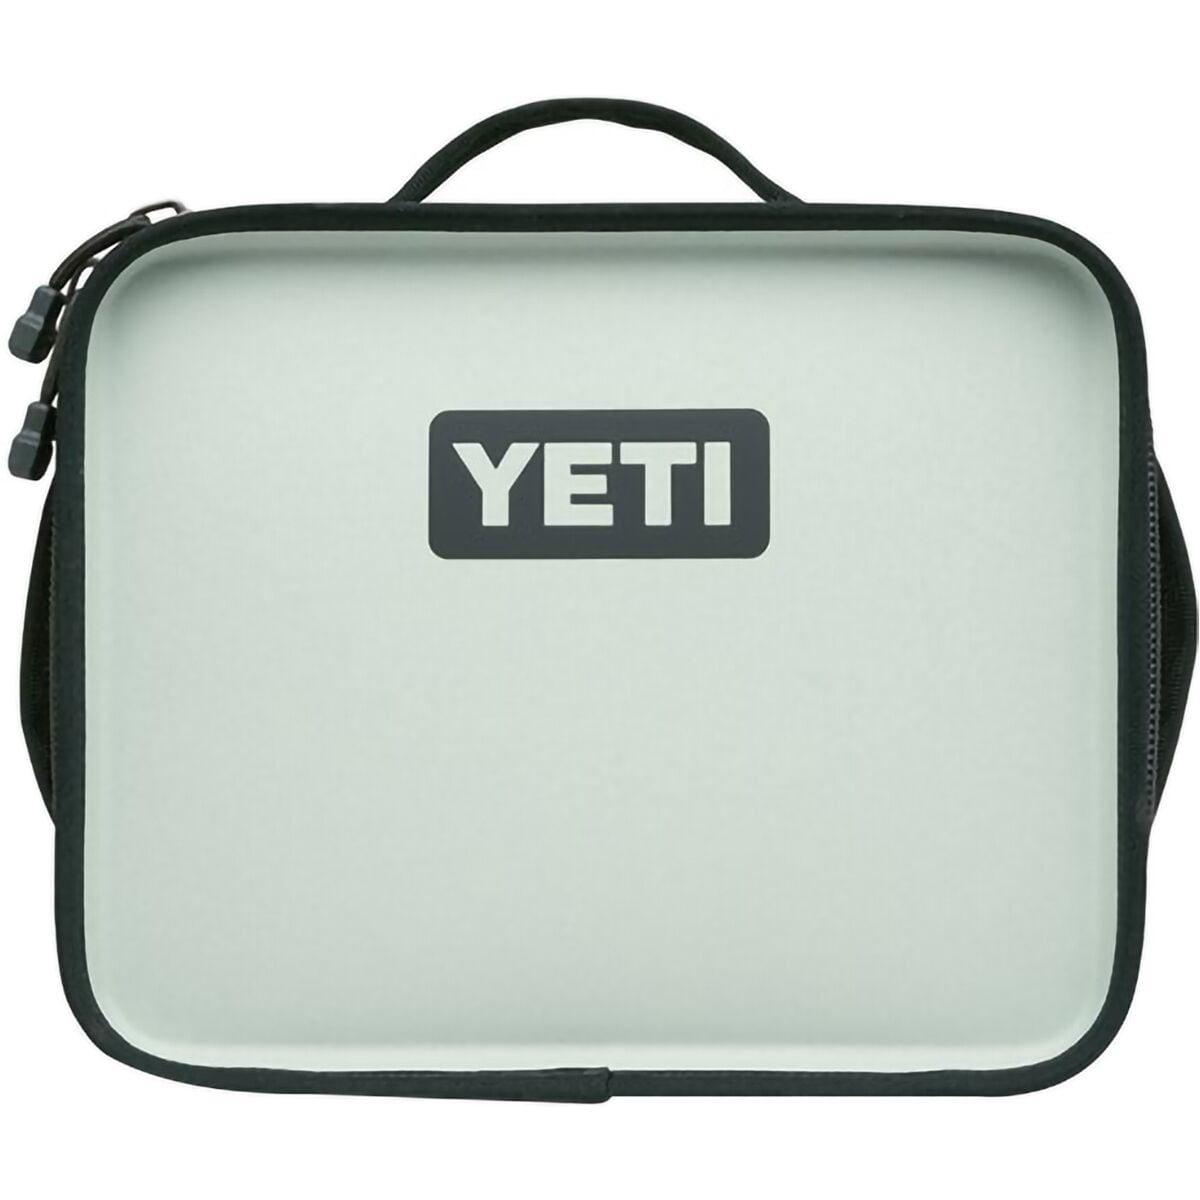 yeti insulated lunch bag